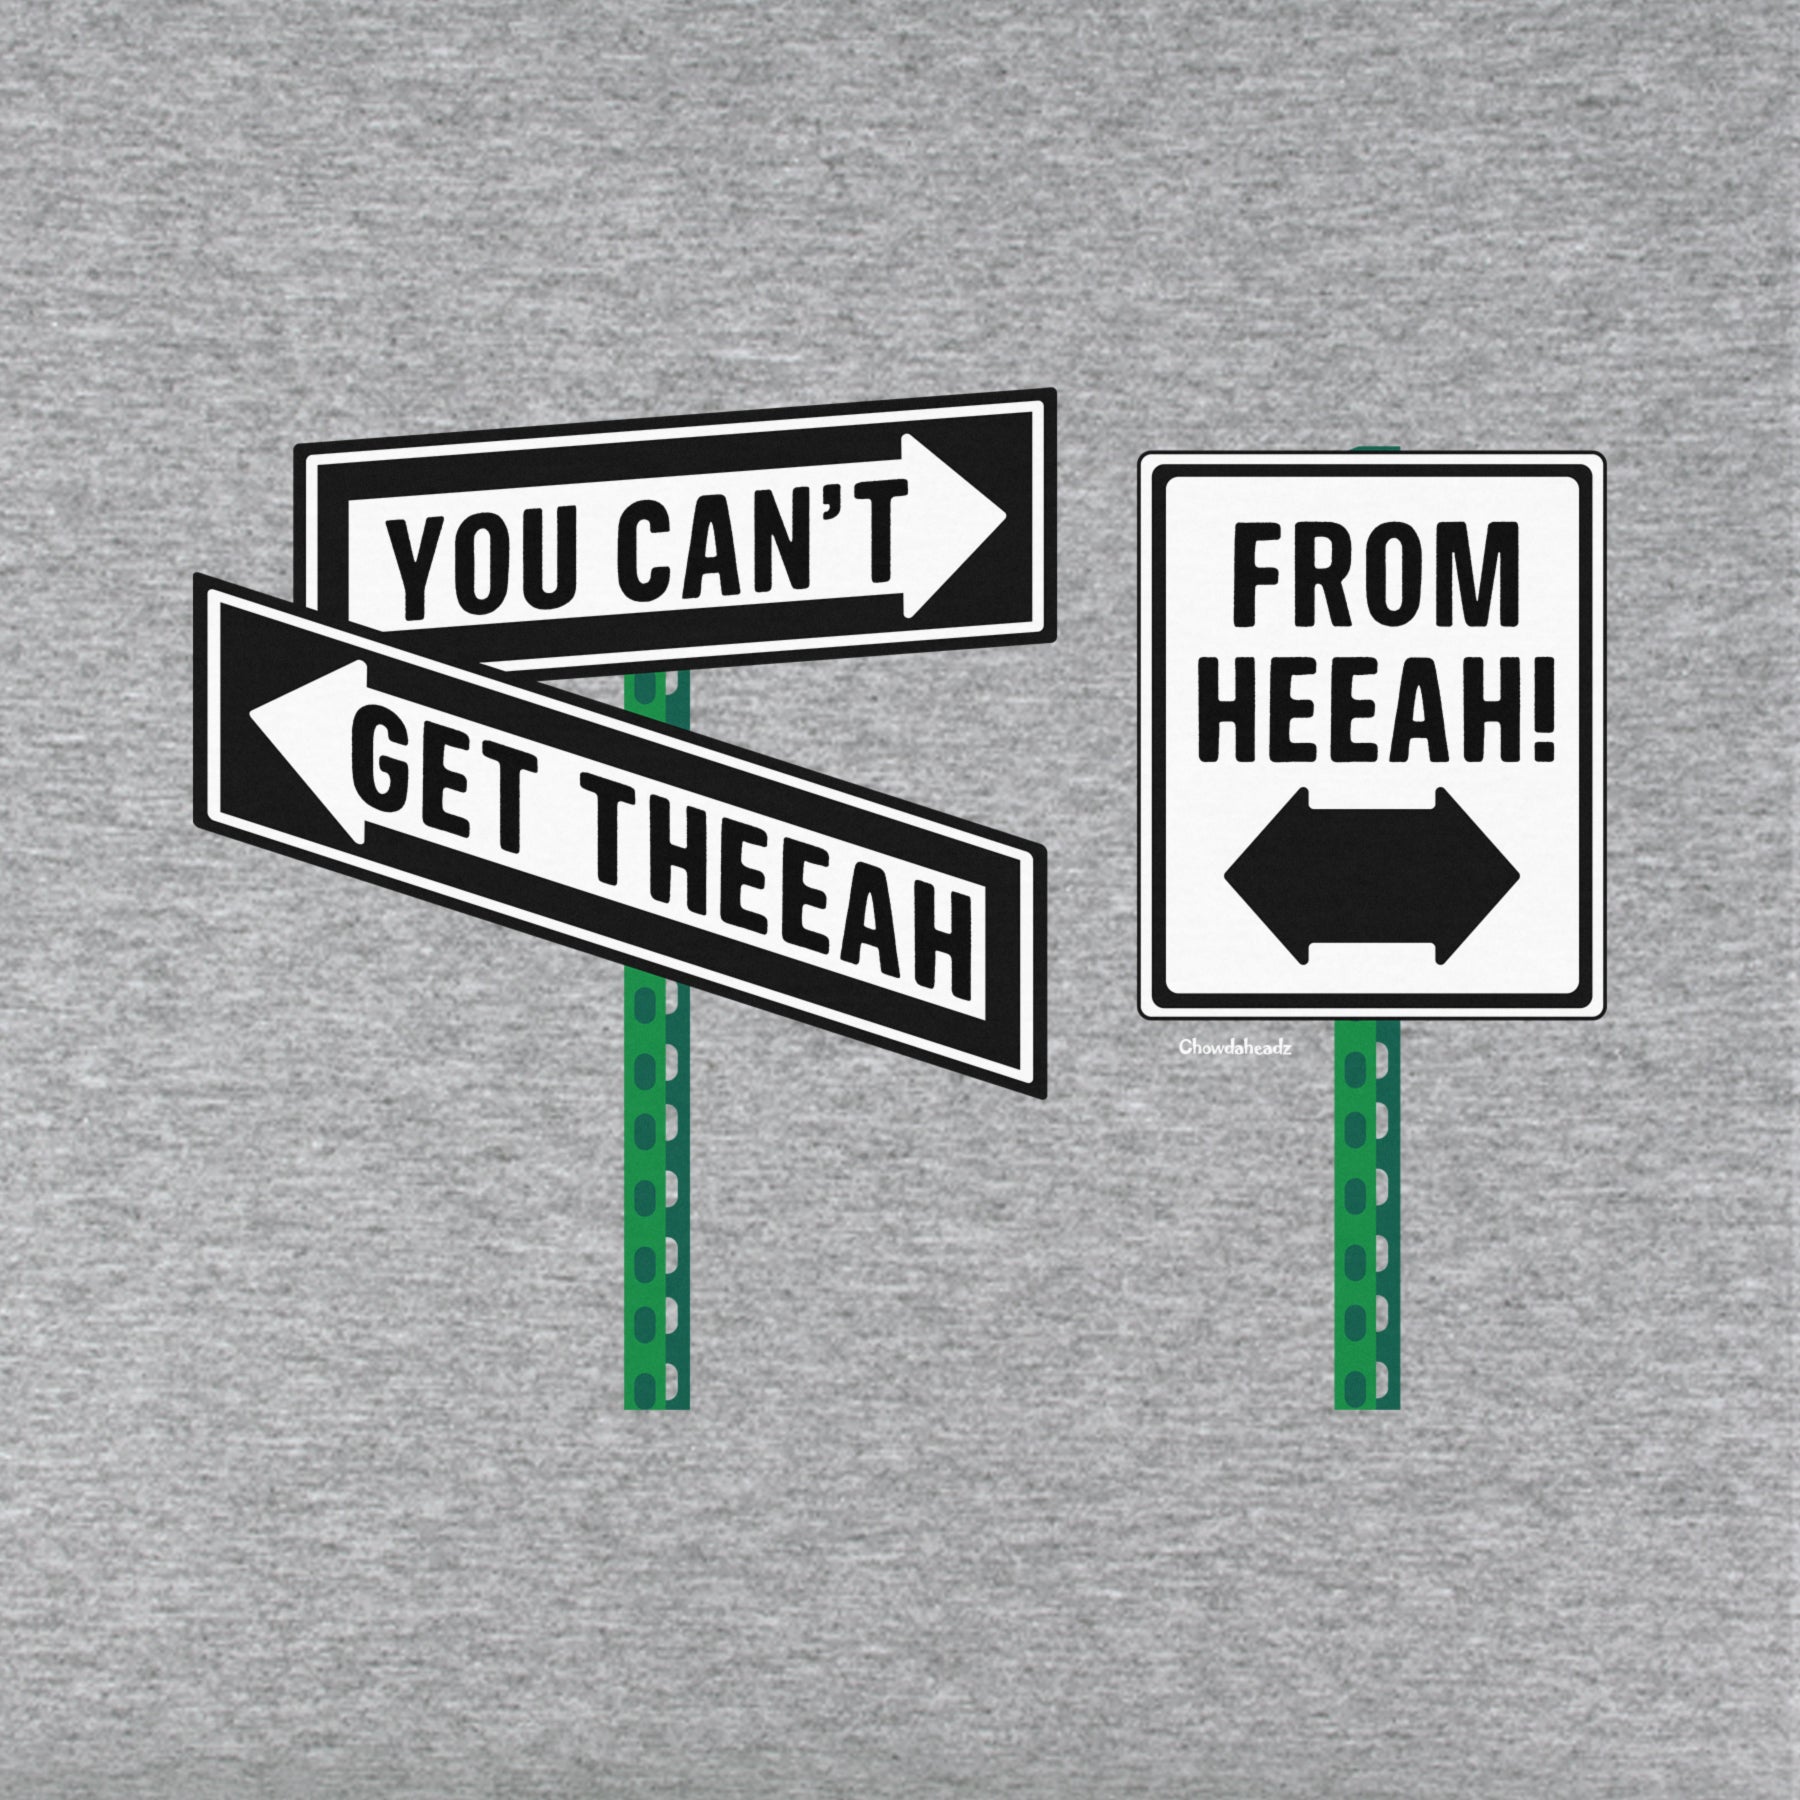 You Can't Get Theeah From Heeah! Youth Hoodie - Chowdaheadz